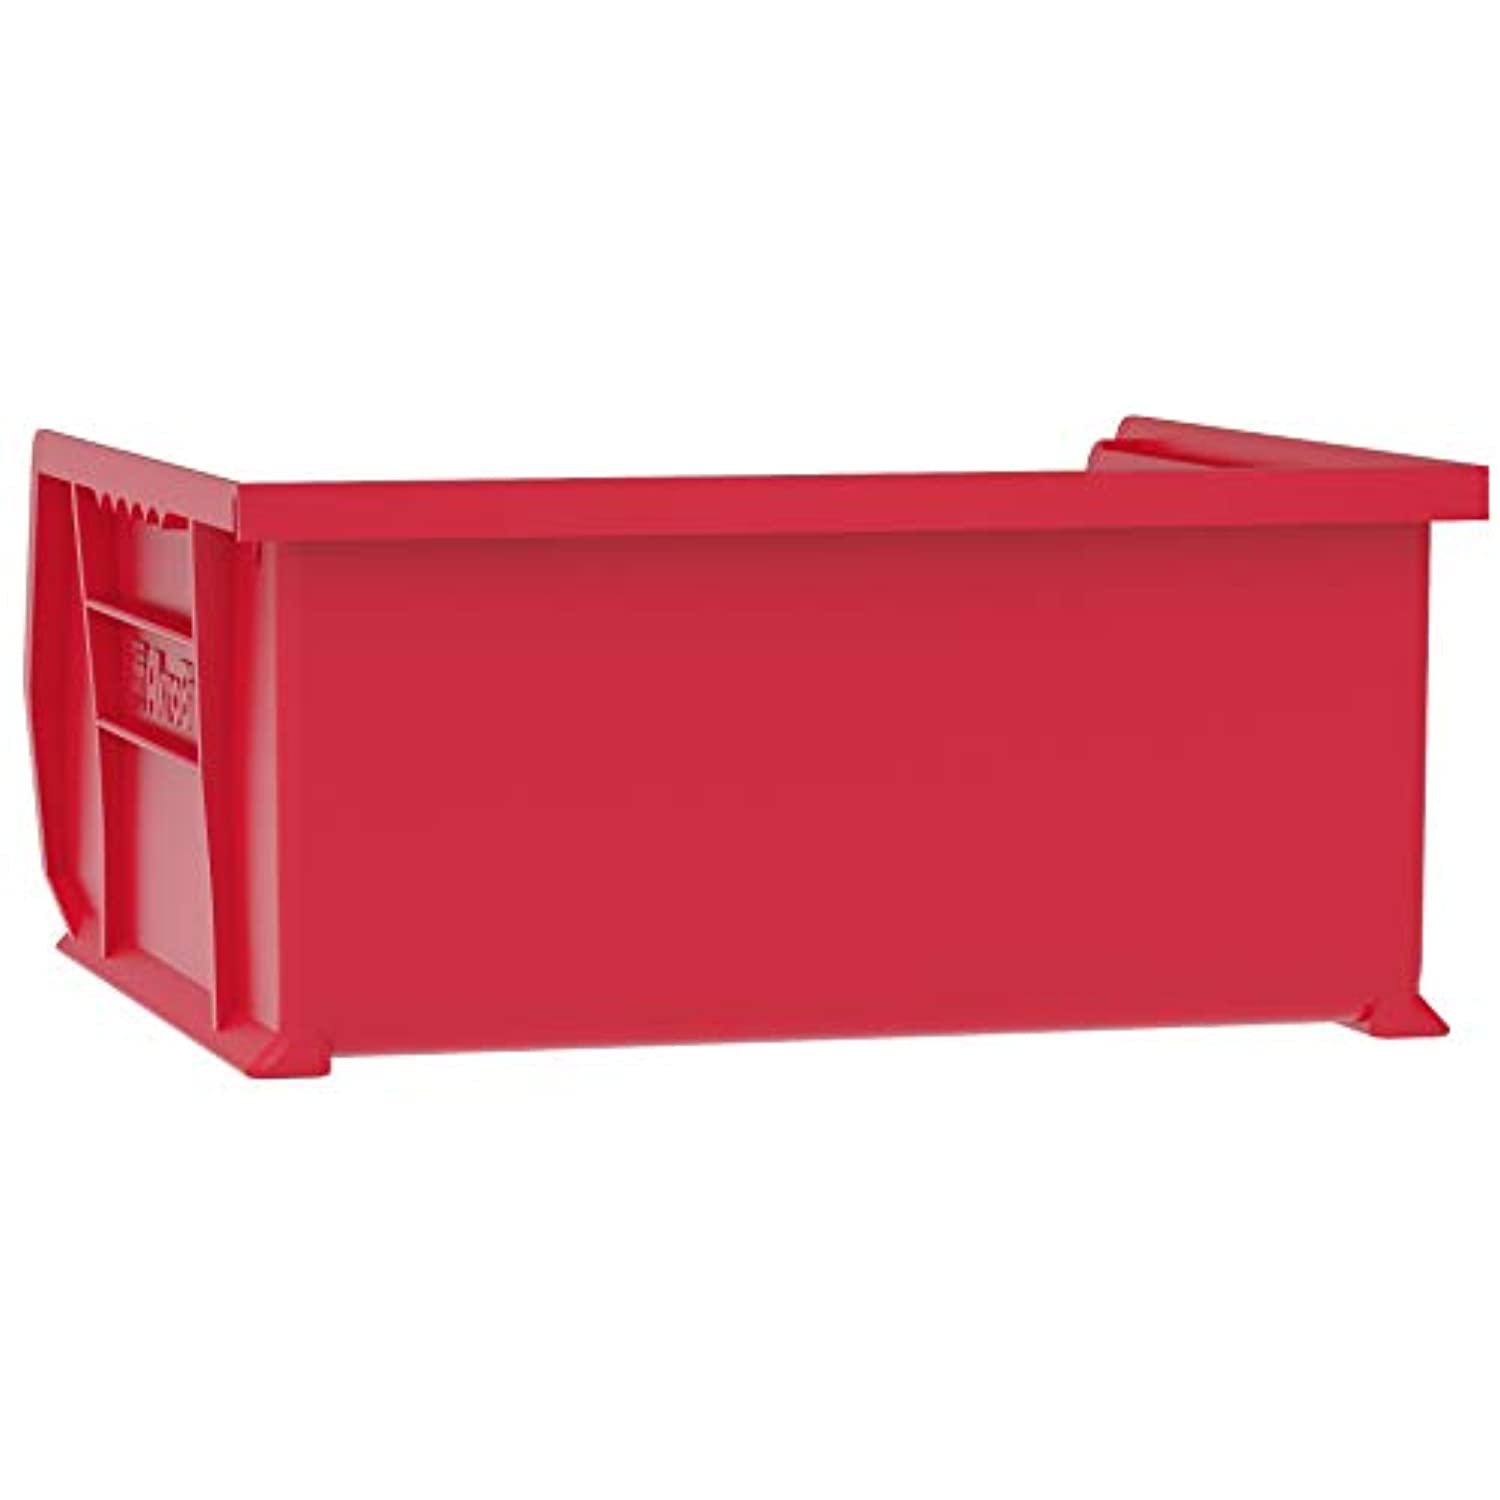 Stacking Plastic Storage Bin Container Set of 6 Akro-Mils 30235 AkroBins, Red - image 4 of 12